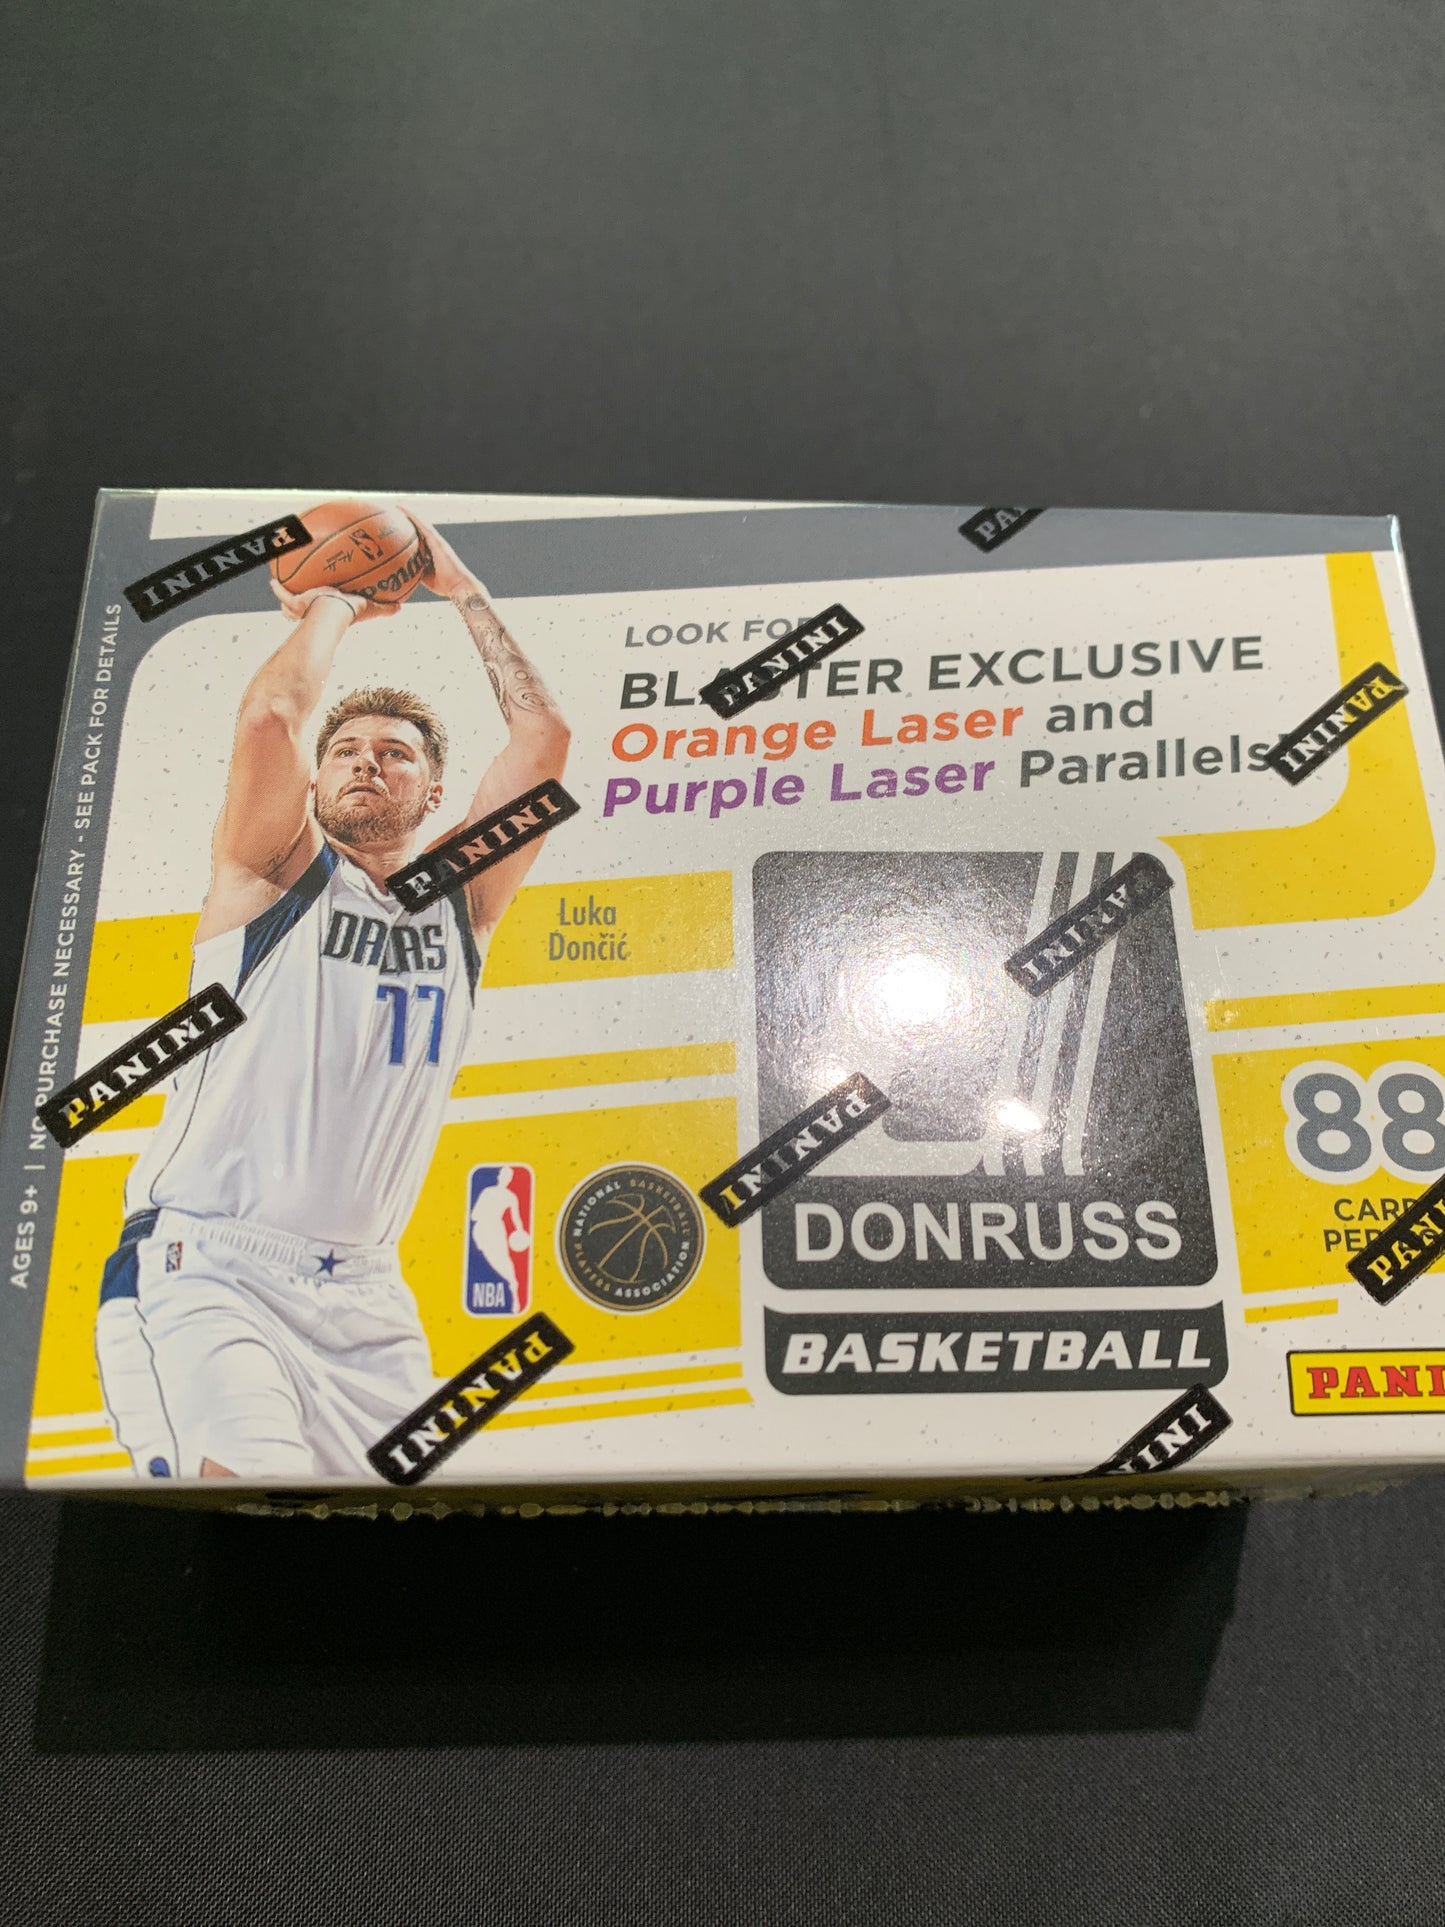 2021-22 Donruss Basketball Blaster Box Newest release from panini